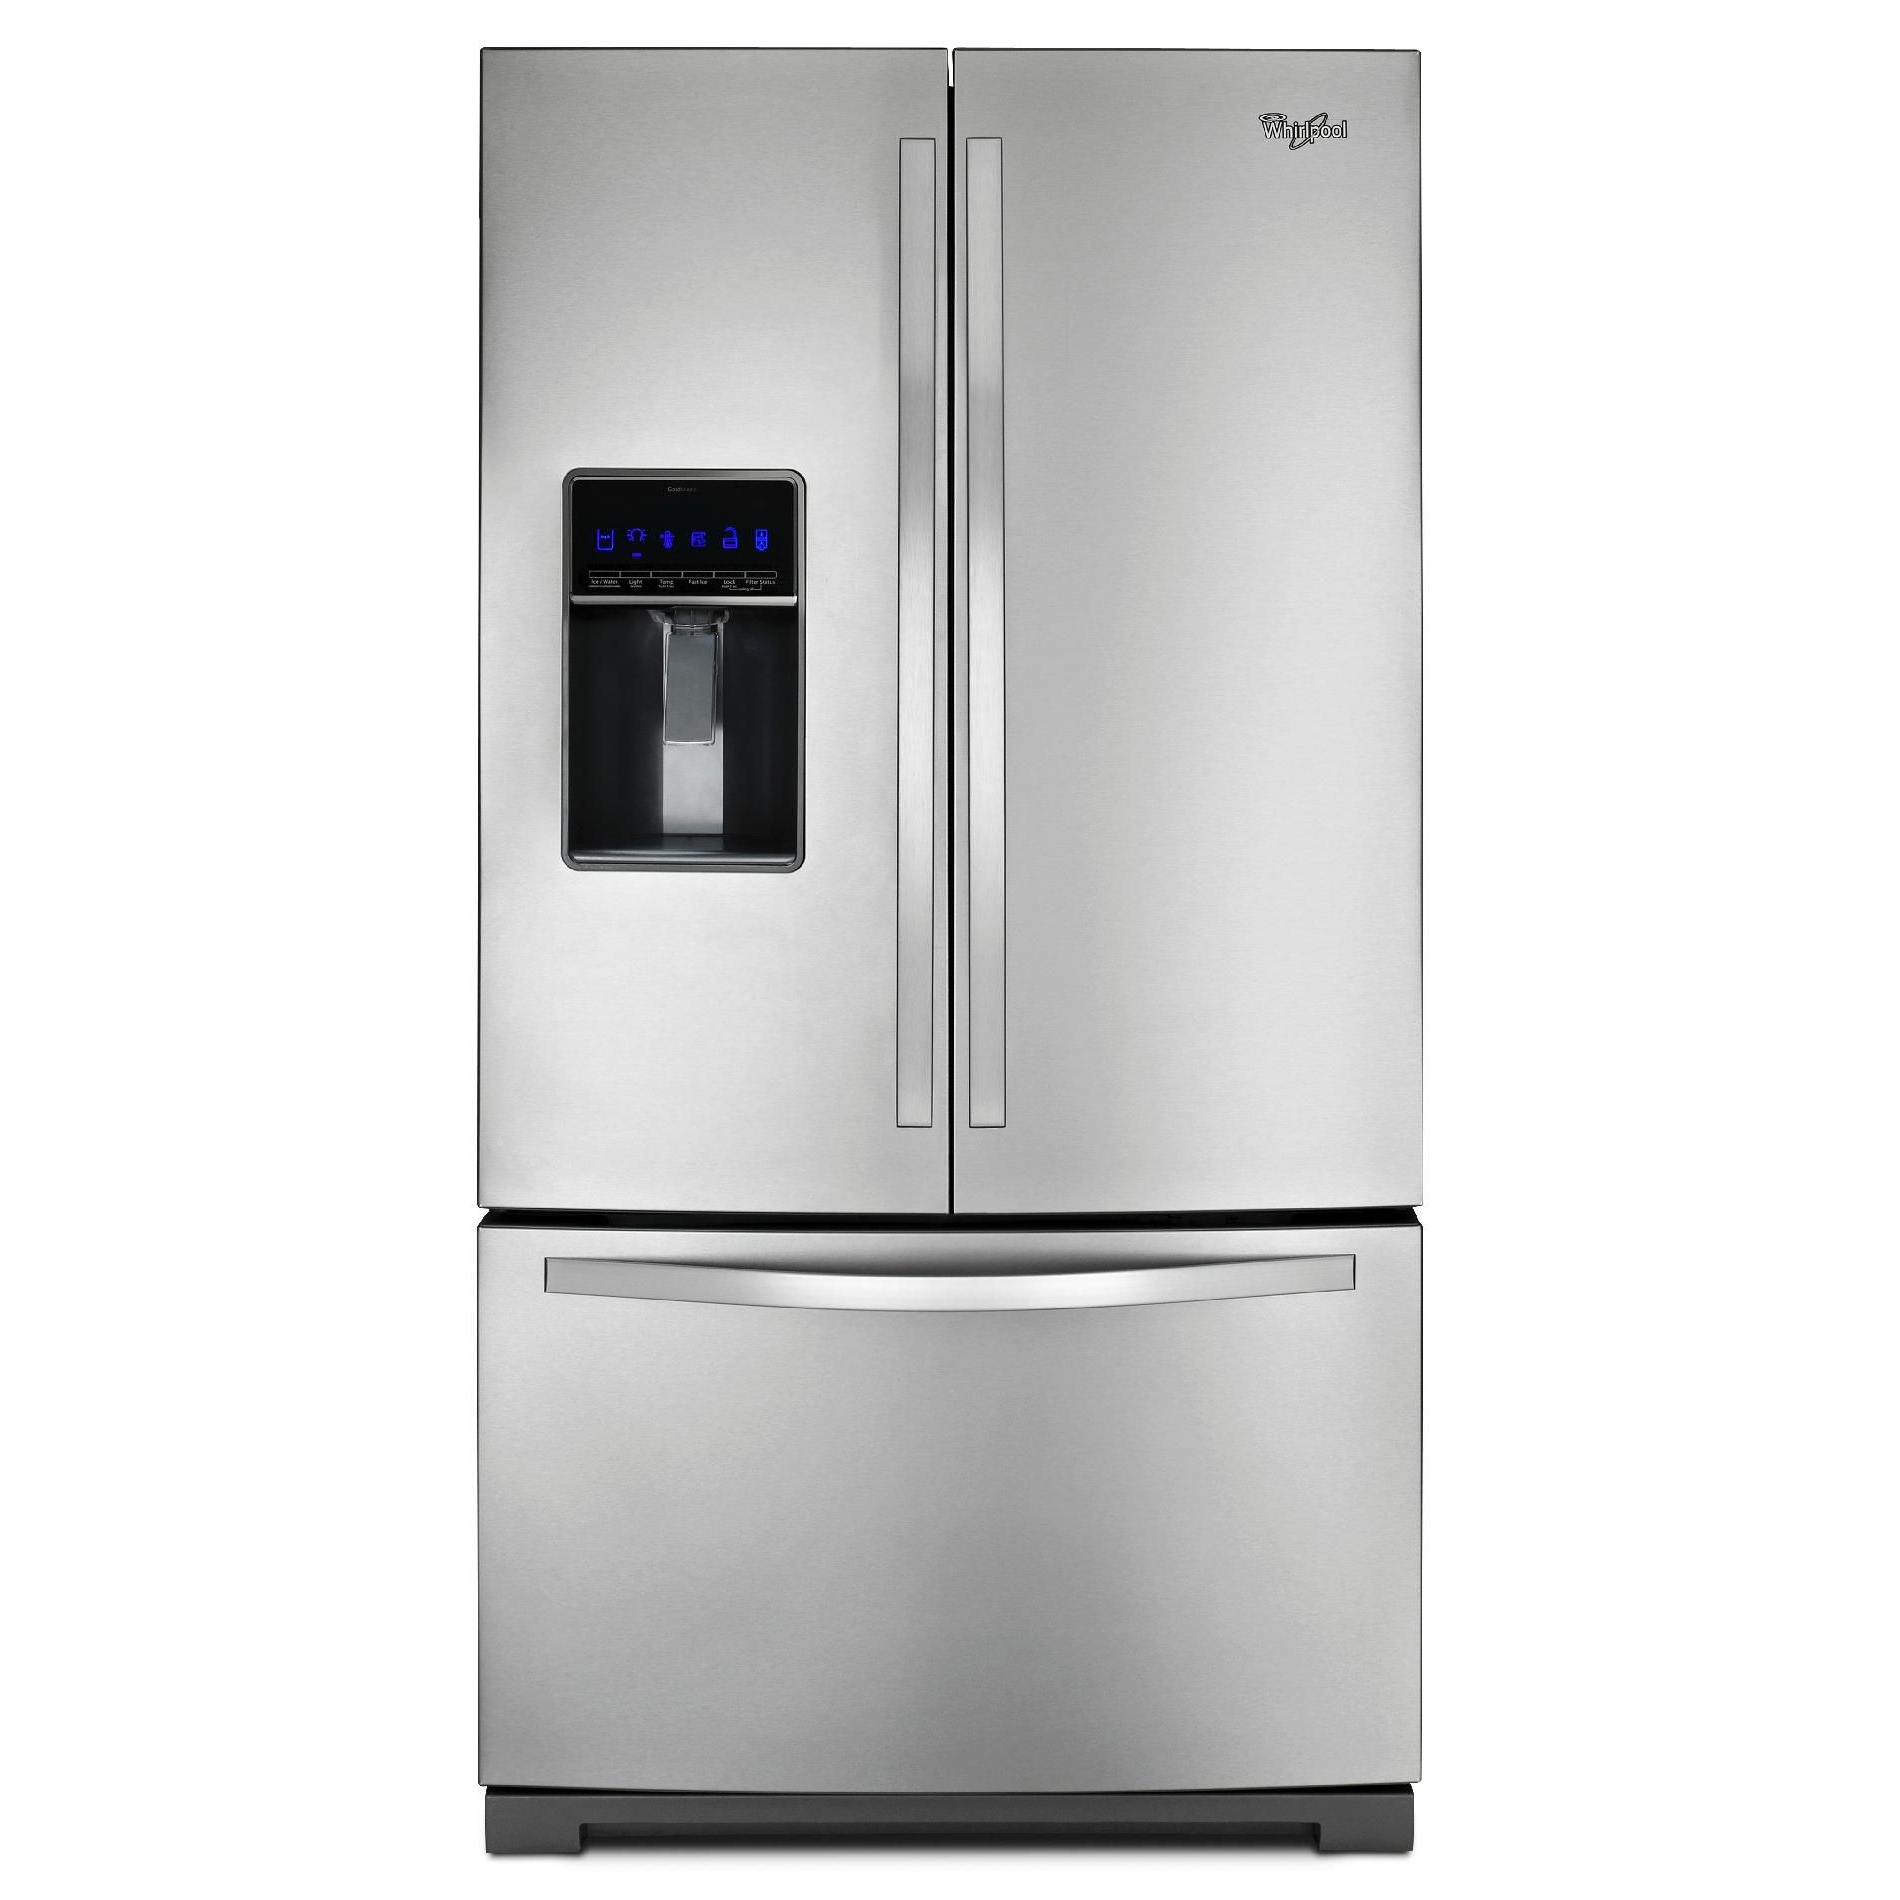 UPC 883049253619 product image for Whirlpool 25 cu. ft. French Door Refrigerator w/ MicroEdge Shelves Stainless Ste | upcitemdb.com